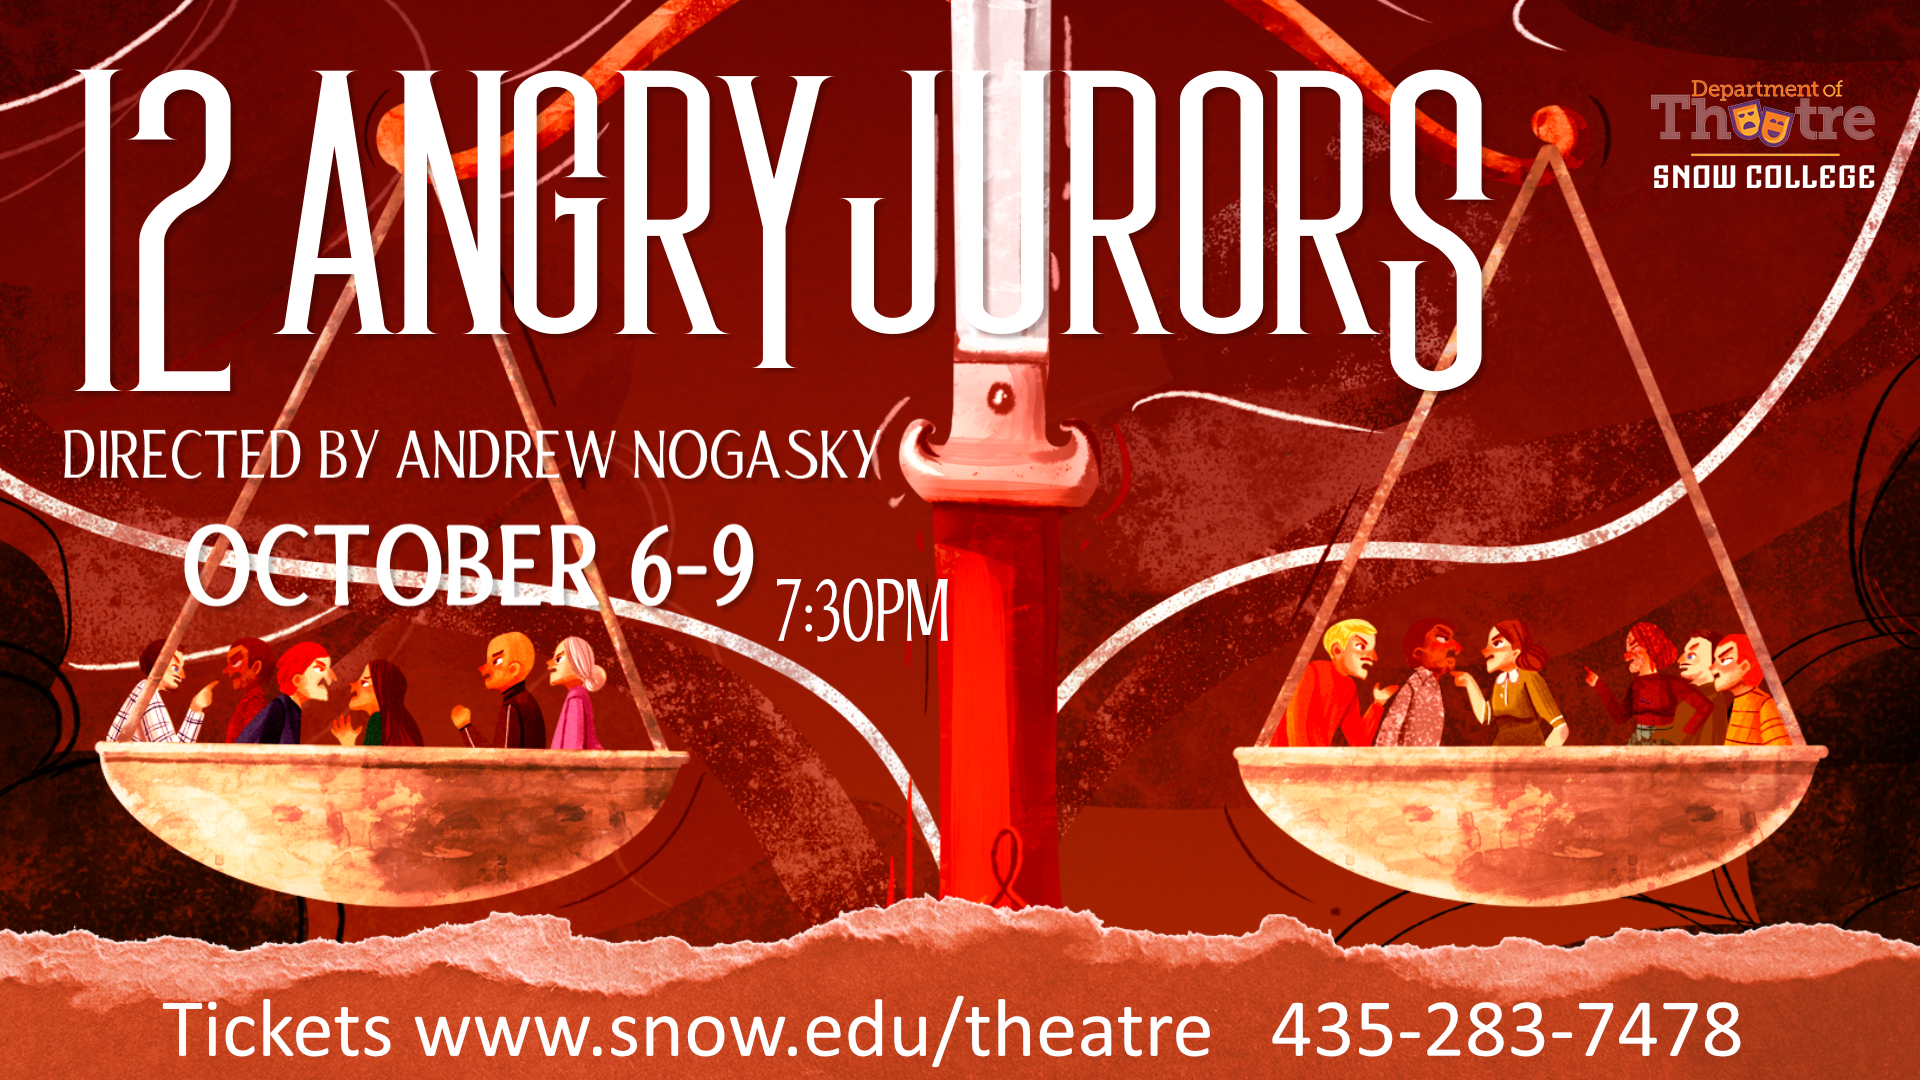 12 Angry Jurors. Directed by Andrew Nogasky, October 6 thru 9, 7:30pm Tickets at www.snow.edu/theatre 435-283-7478